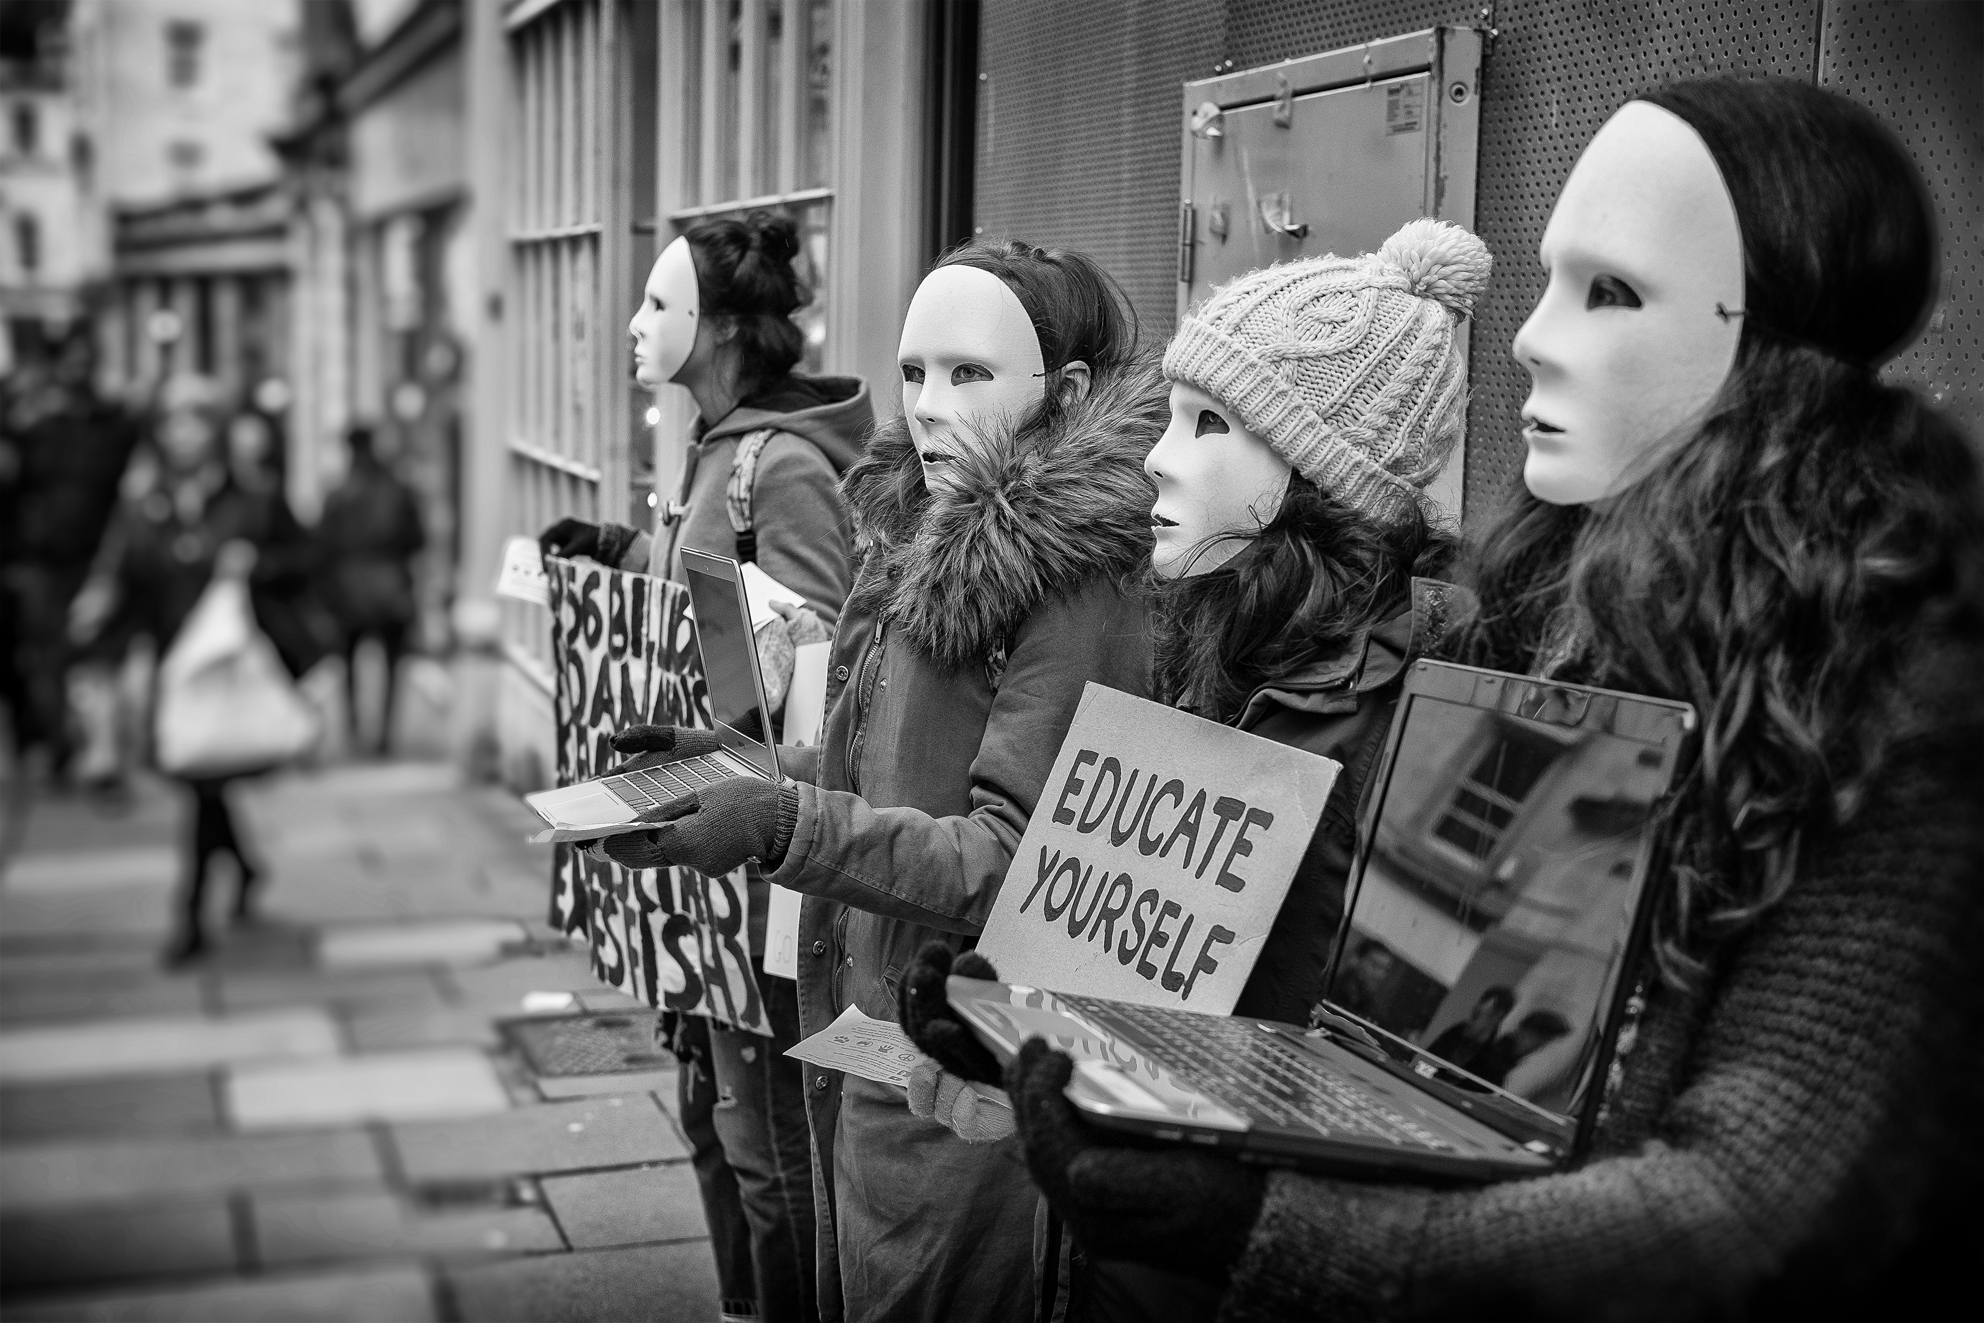 educate yourself - animal rights protest in Bath